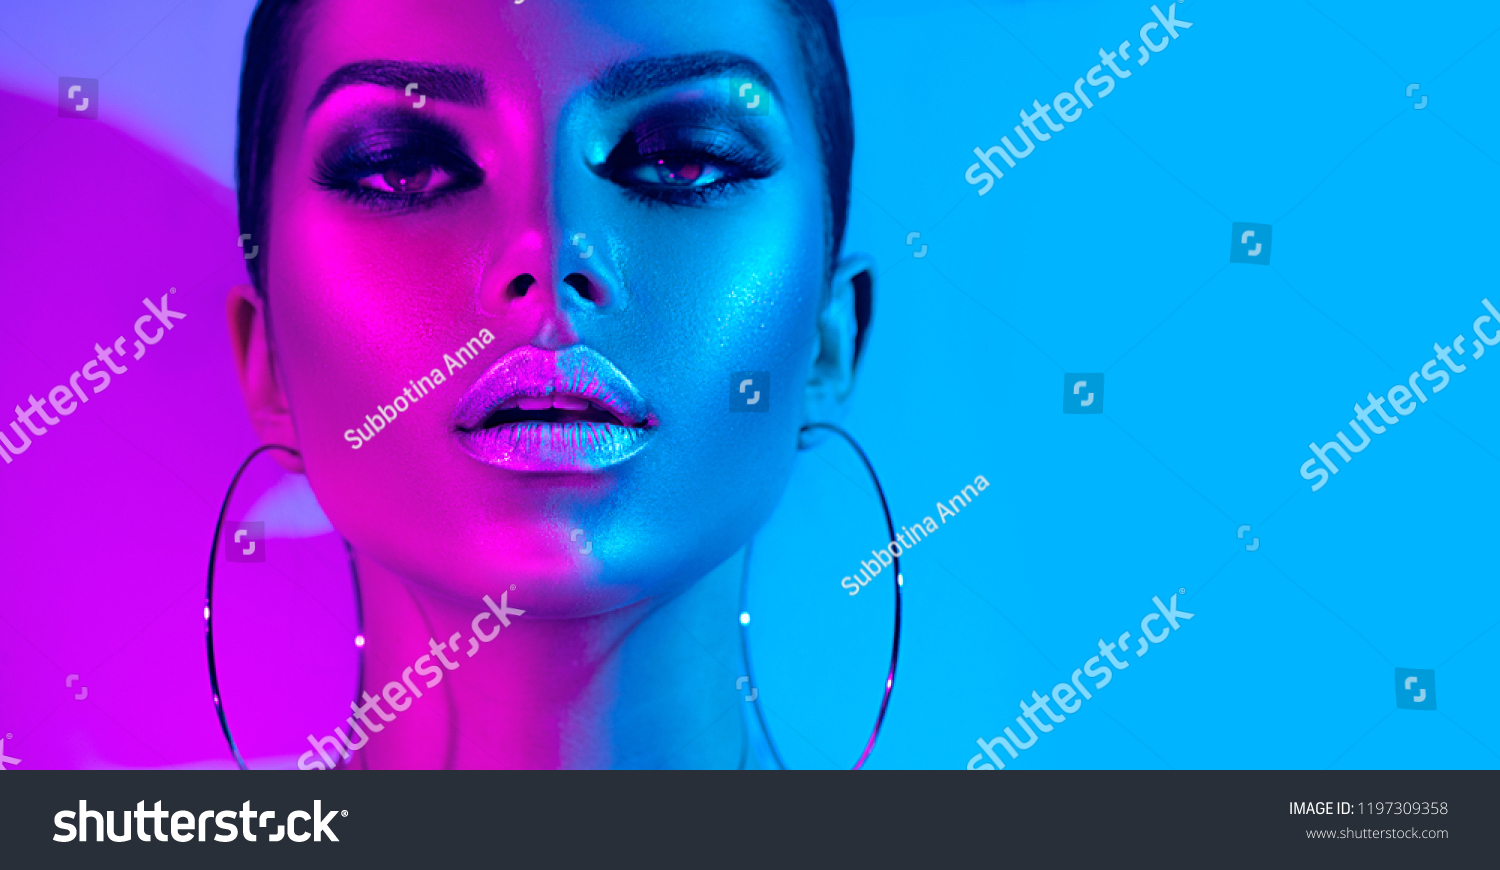 High Fashion model metallic silver lips and face woman in colorful bright neon uv blue and purple lights, posing in studio, beautiful girl, glowing make-up, colorful make up. Glitter Vivid neon makeup #1197309358